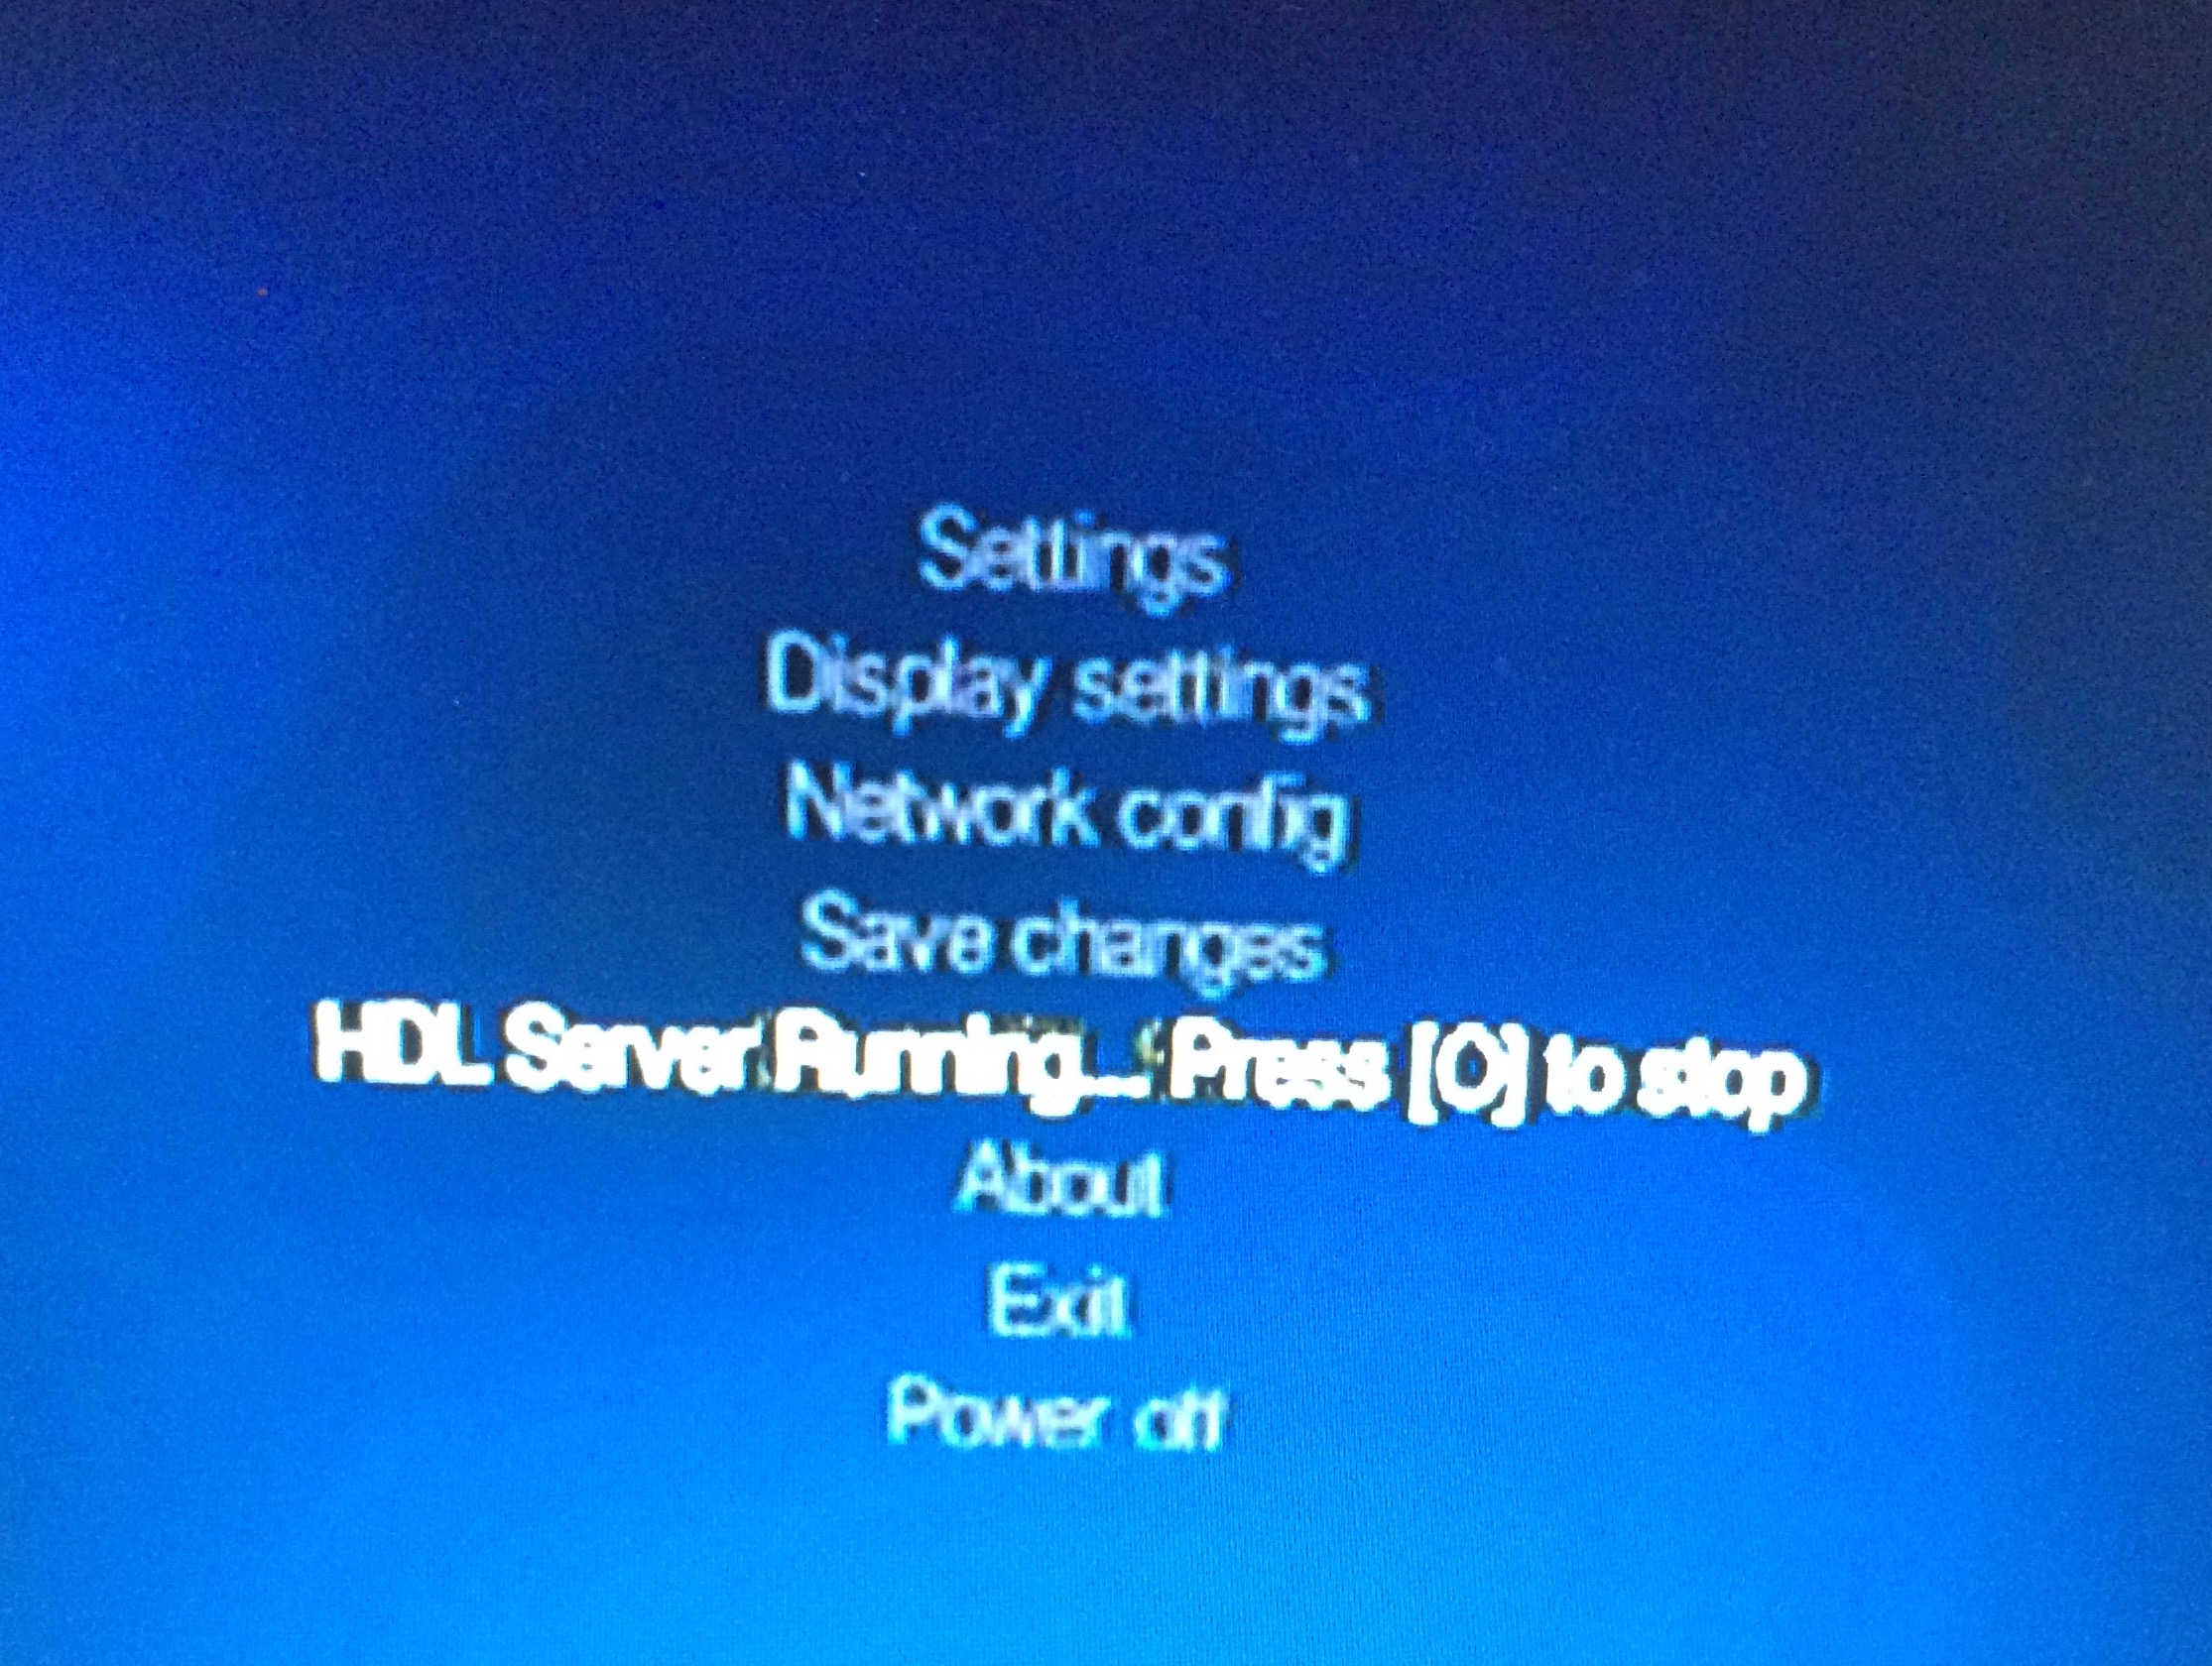 OPL in 720p line doubled to 1440p, mounting backups over the network. What  a time to be alive. : r/ps2